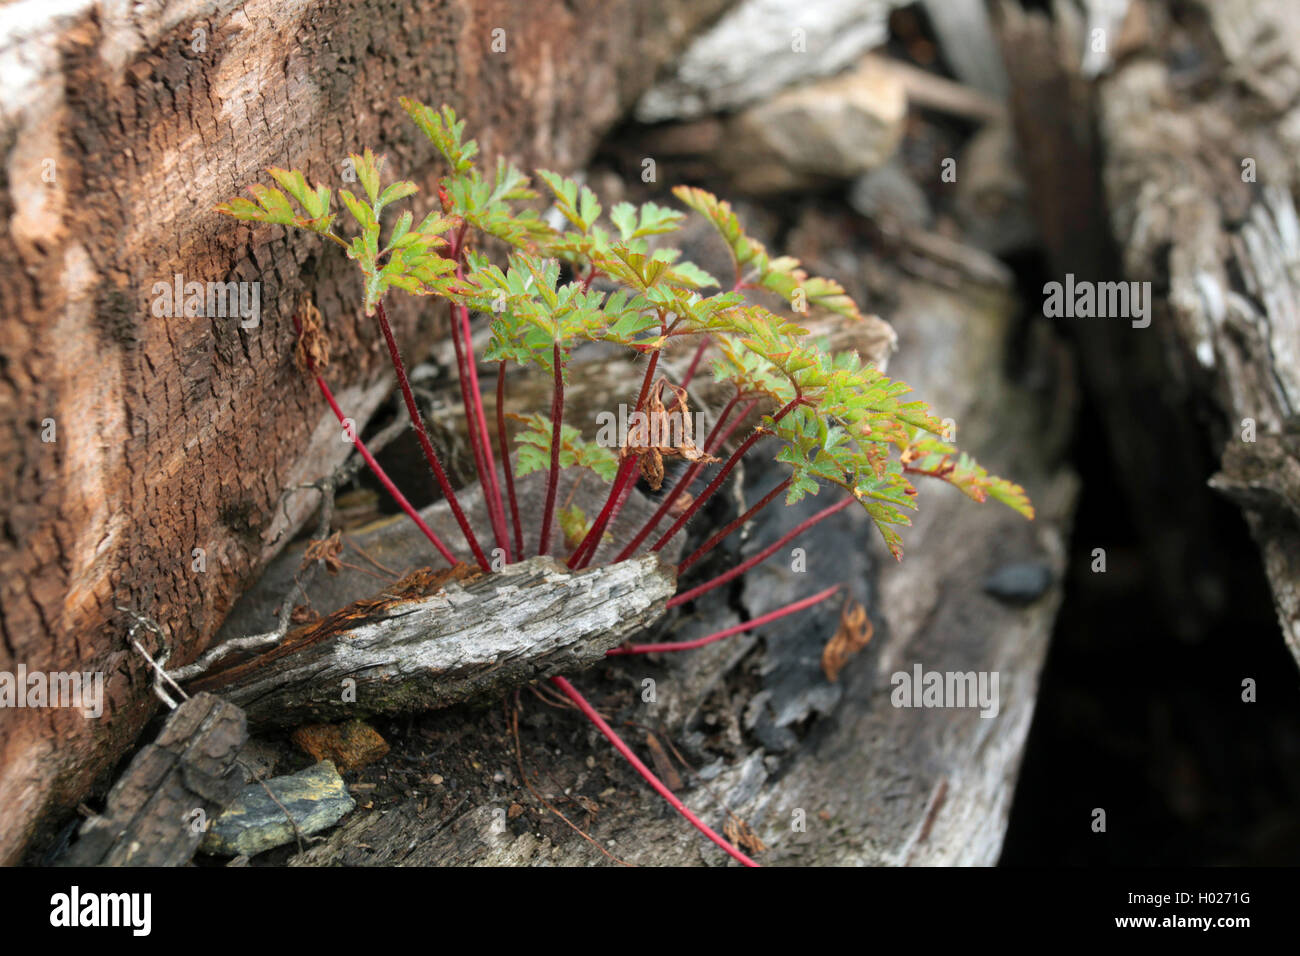 Herb Robert, Red Robin, Death come quickly, Robert Geranium (Geranium robertianum, Robertiella robertiana), on old railroad ties, Germany Stock Photo